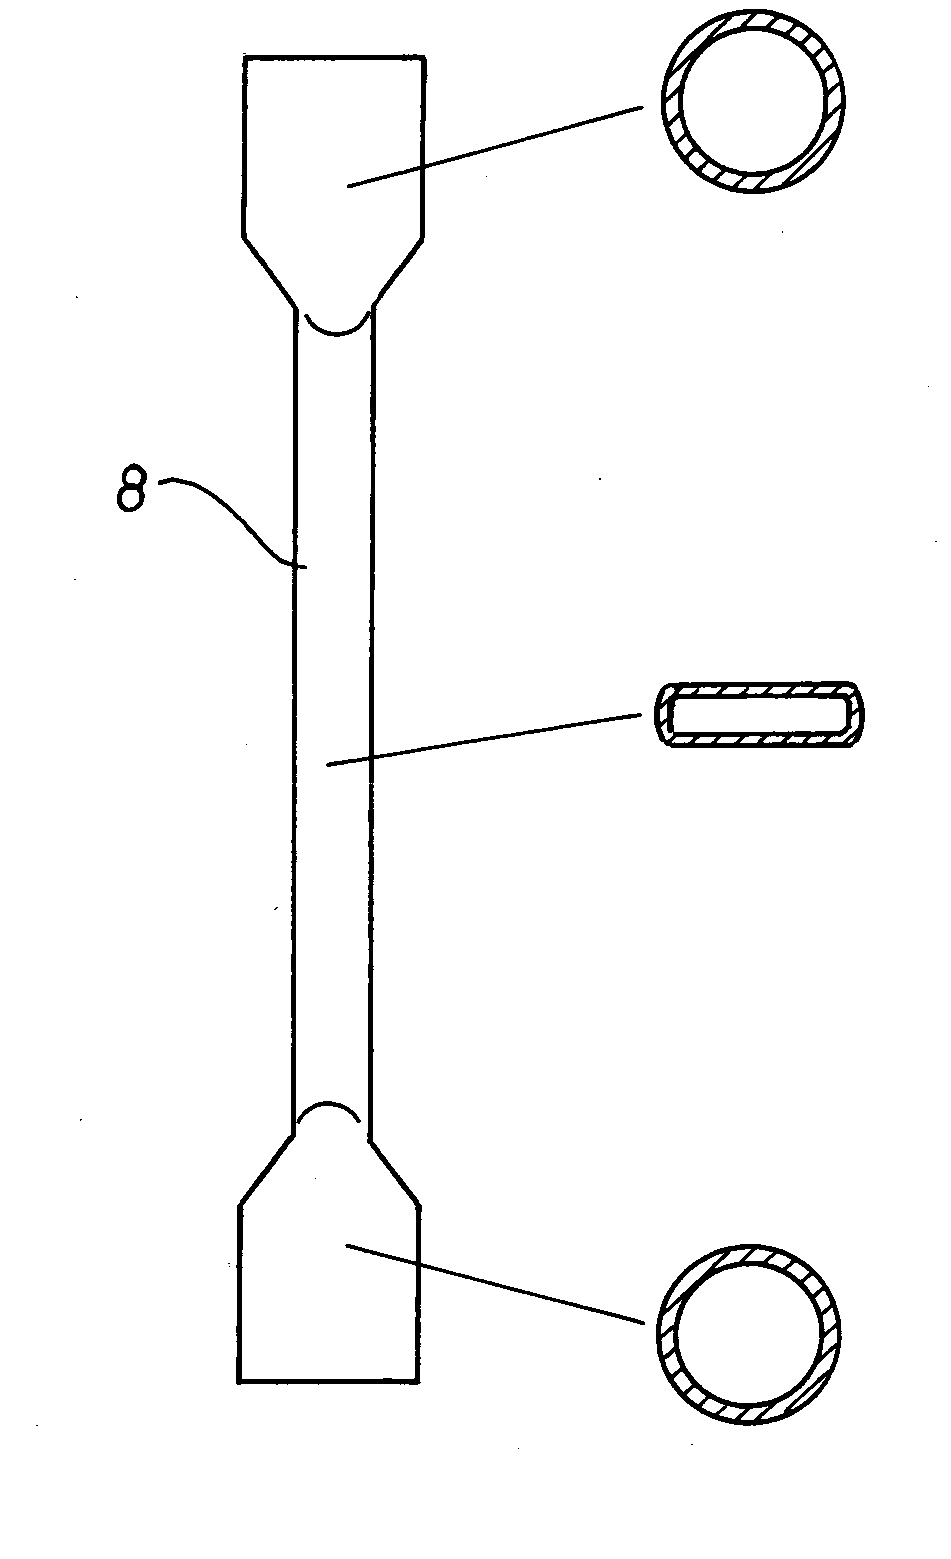 Process and apparatus for removing volatile substances from highly viscous media